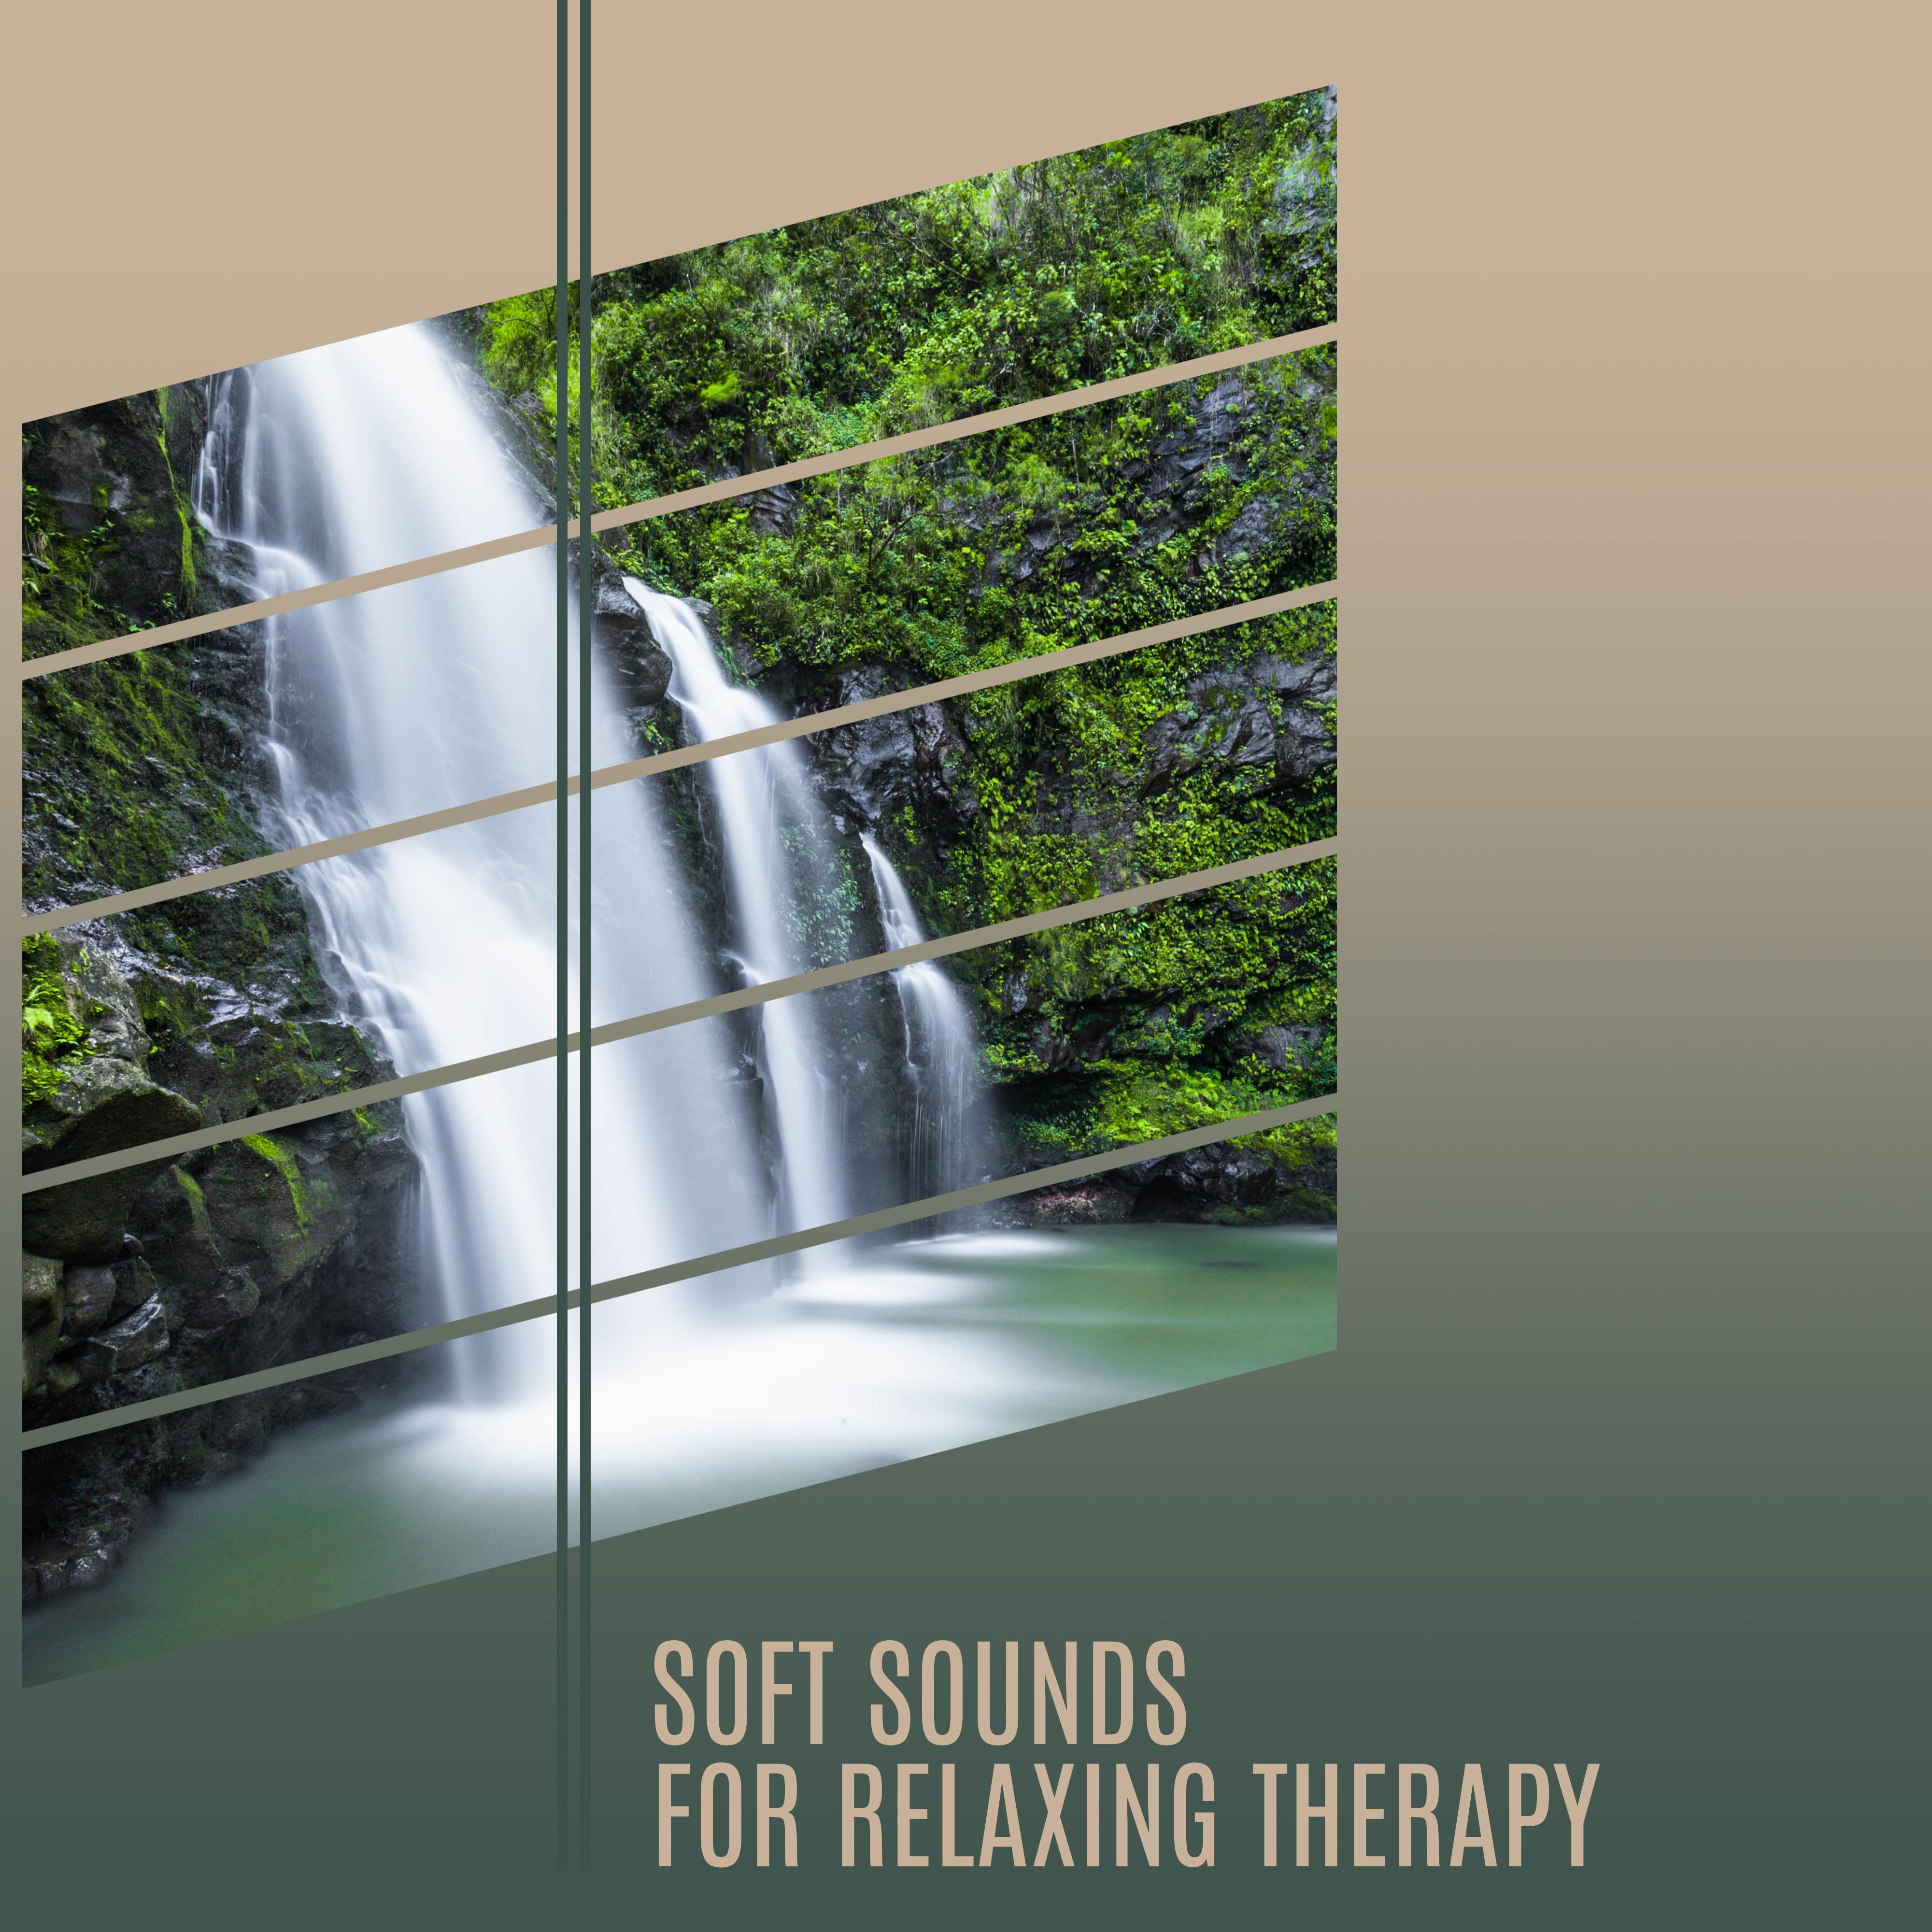 Soft Sounds for Relaxing Therapy – Peaceful Music, Calm Sounds to Rest, Easy Listening, Chill Yourself, New Age Music